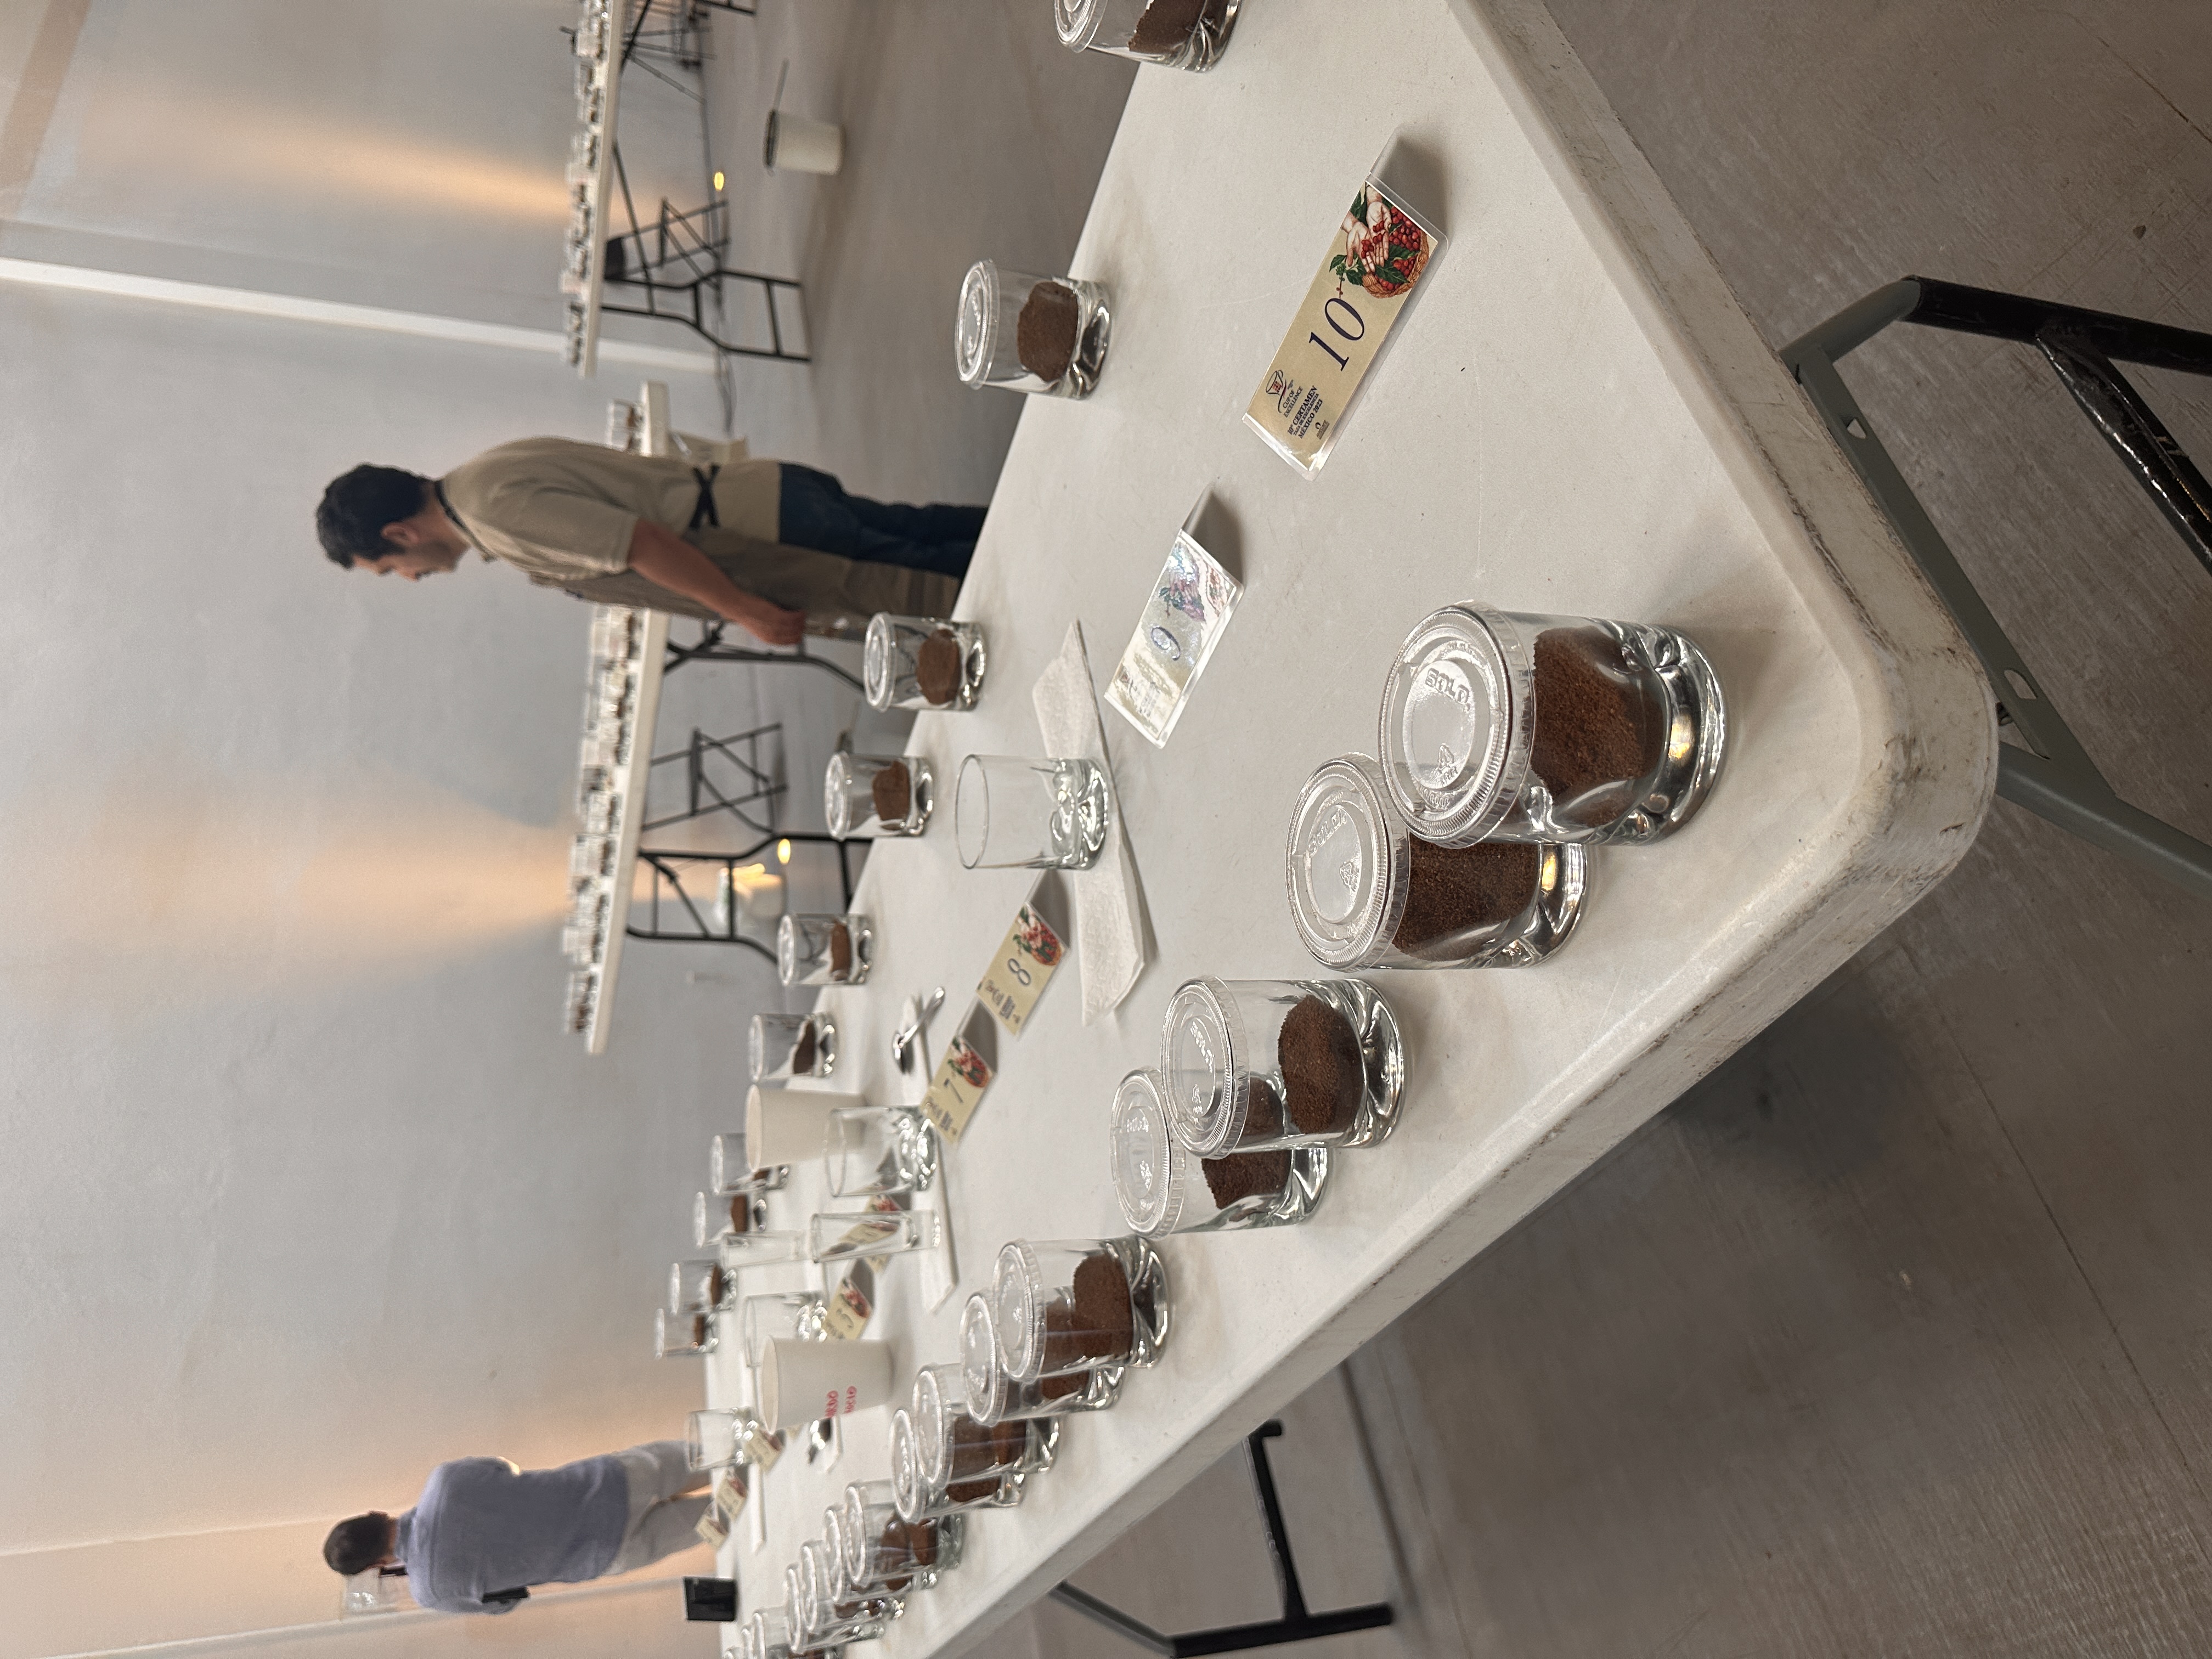 Cupping event in Mexico COE